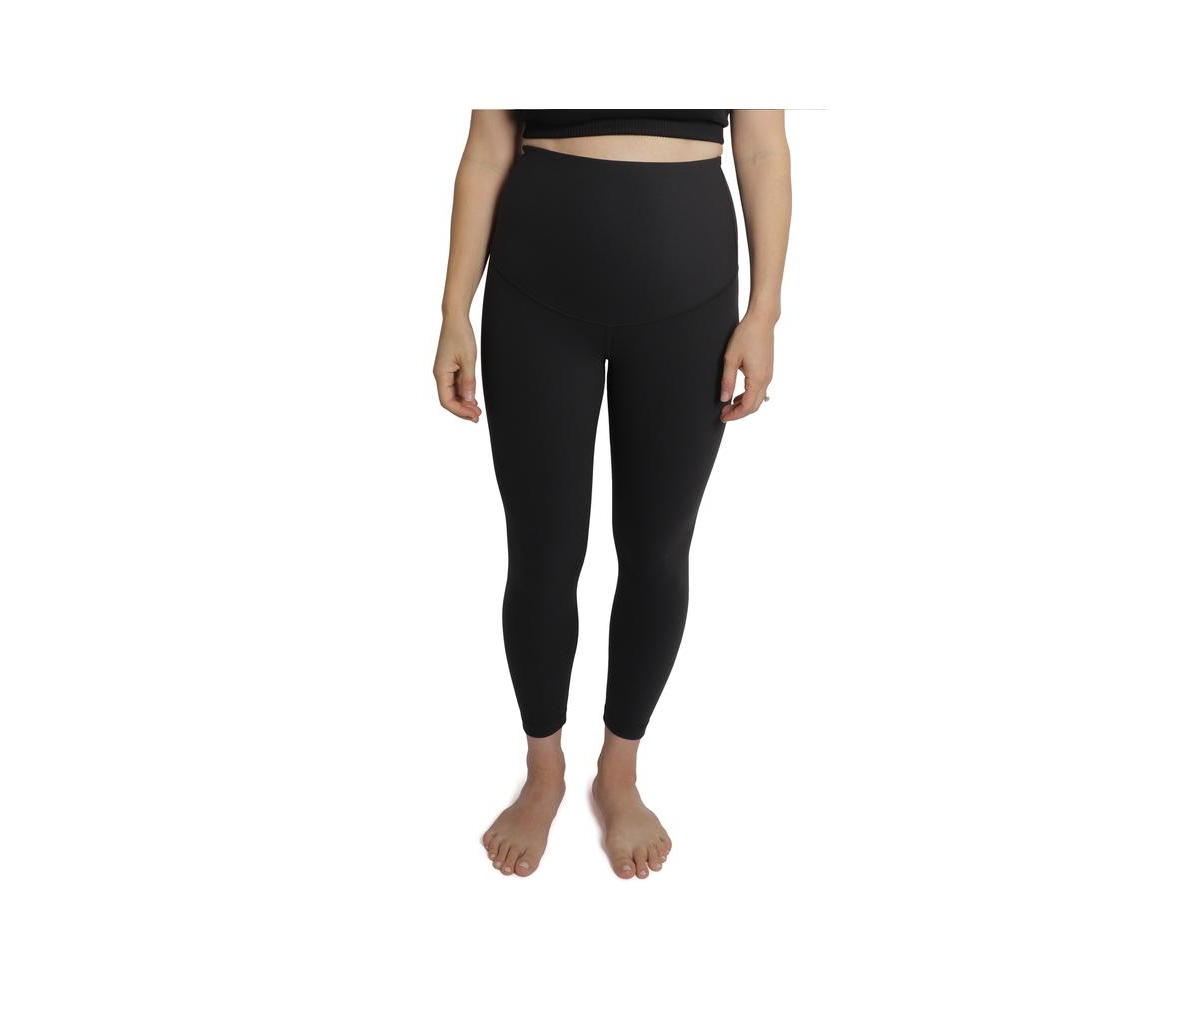 Ingrid + Isabel Women's Maternity Post Active Legging With Crossover Panel - Black